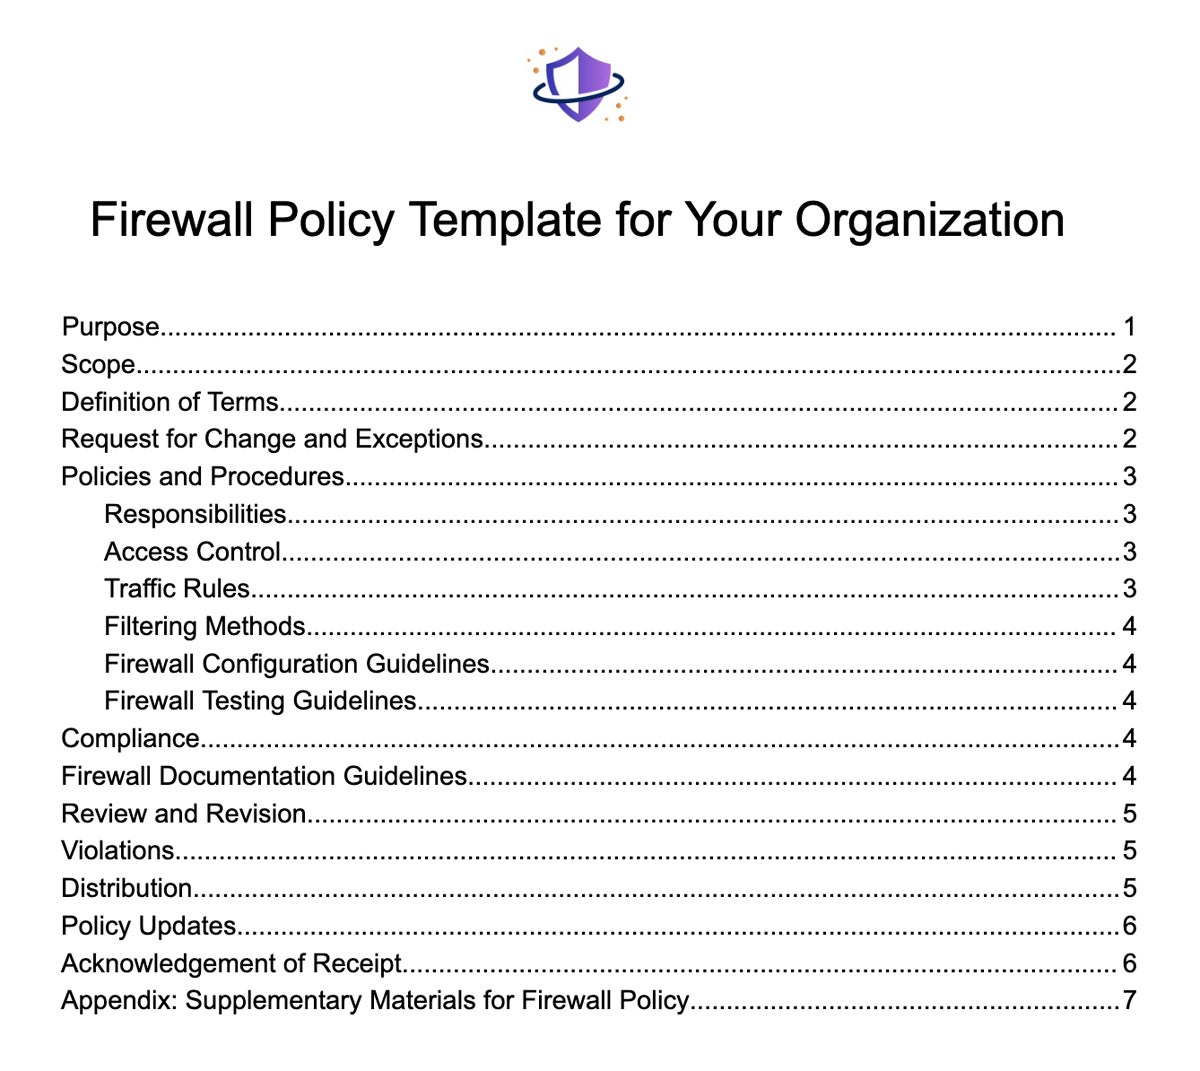 Free firewall policy template.